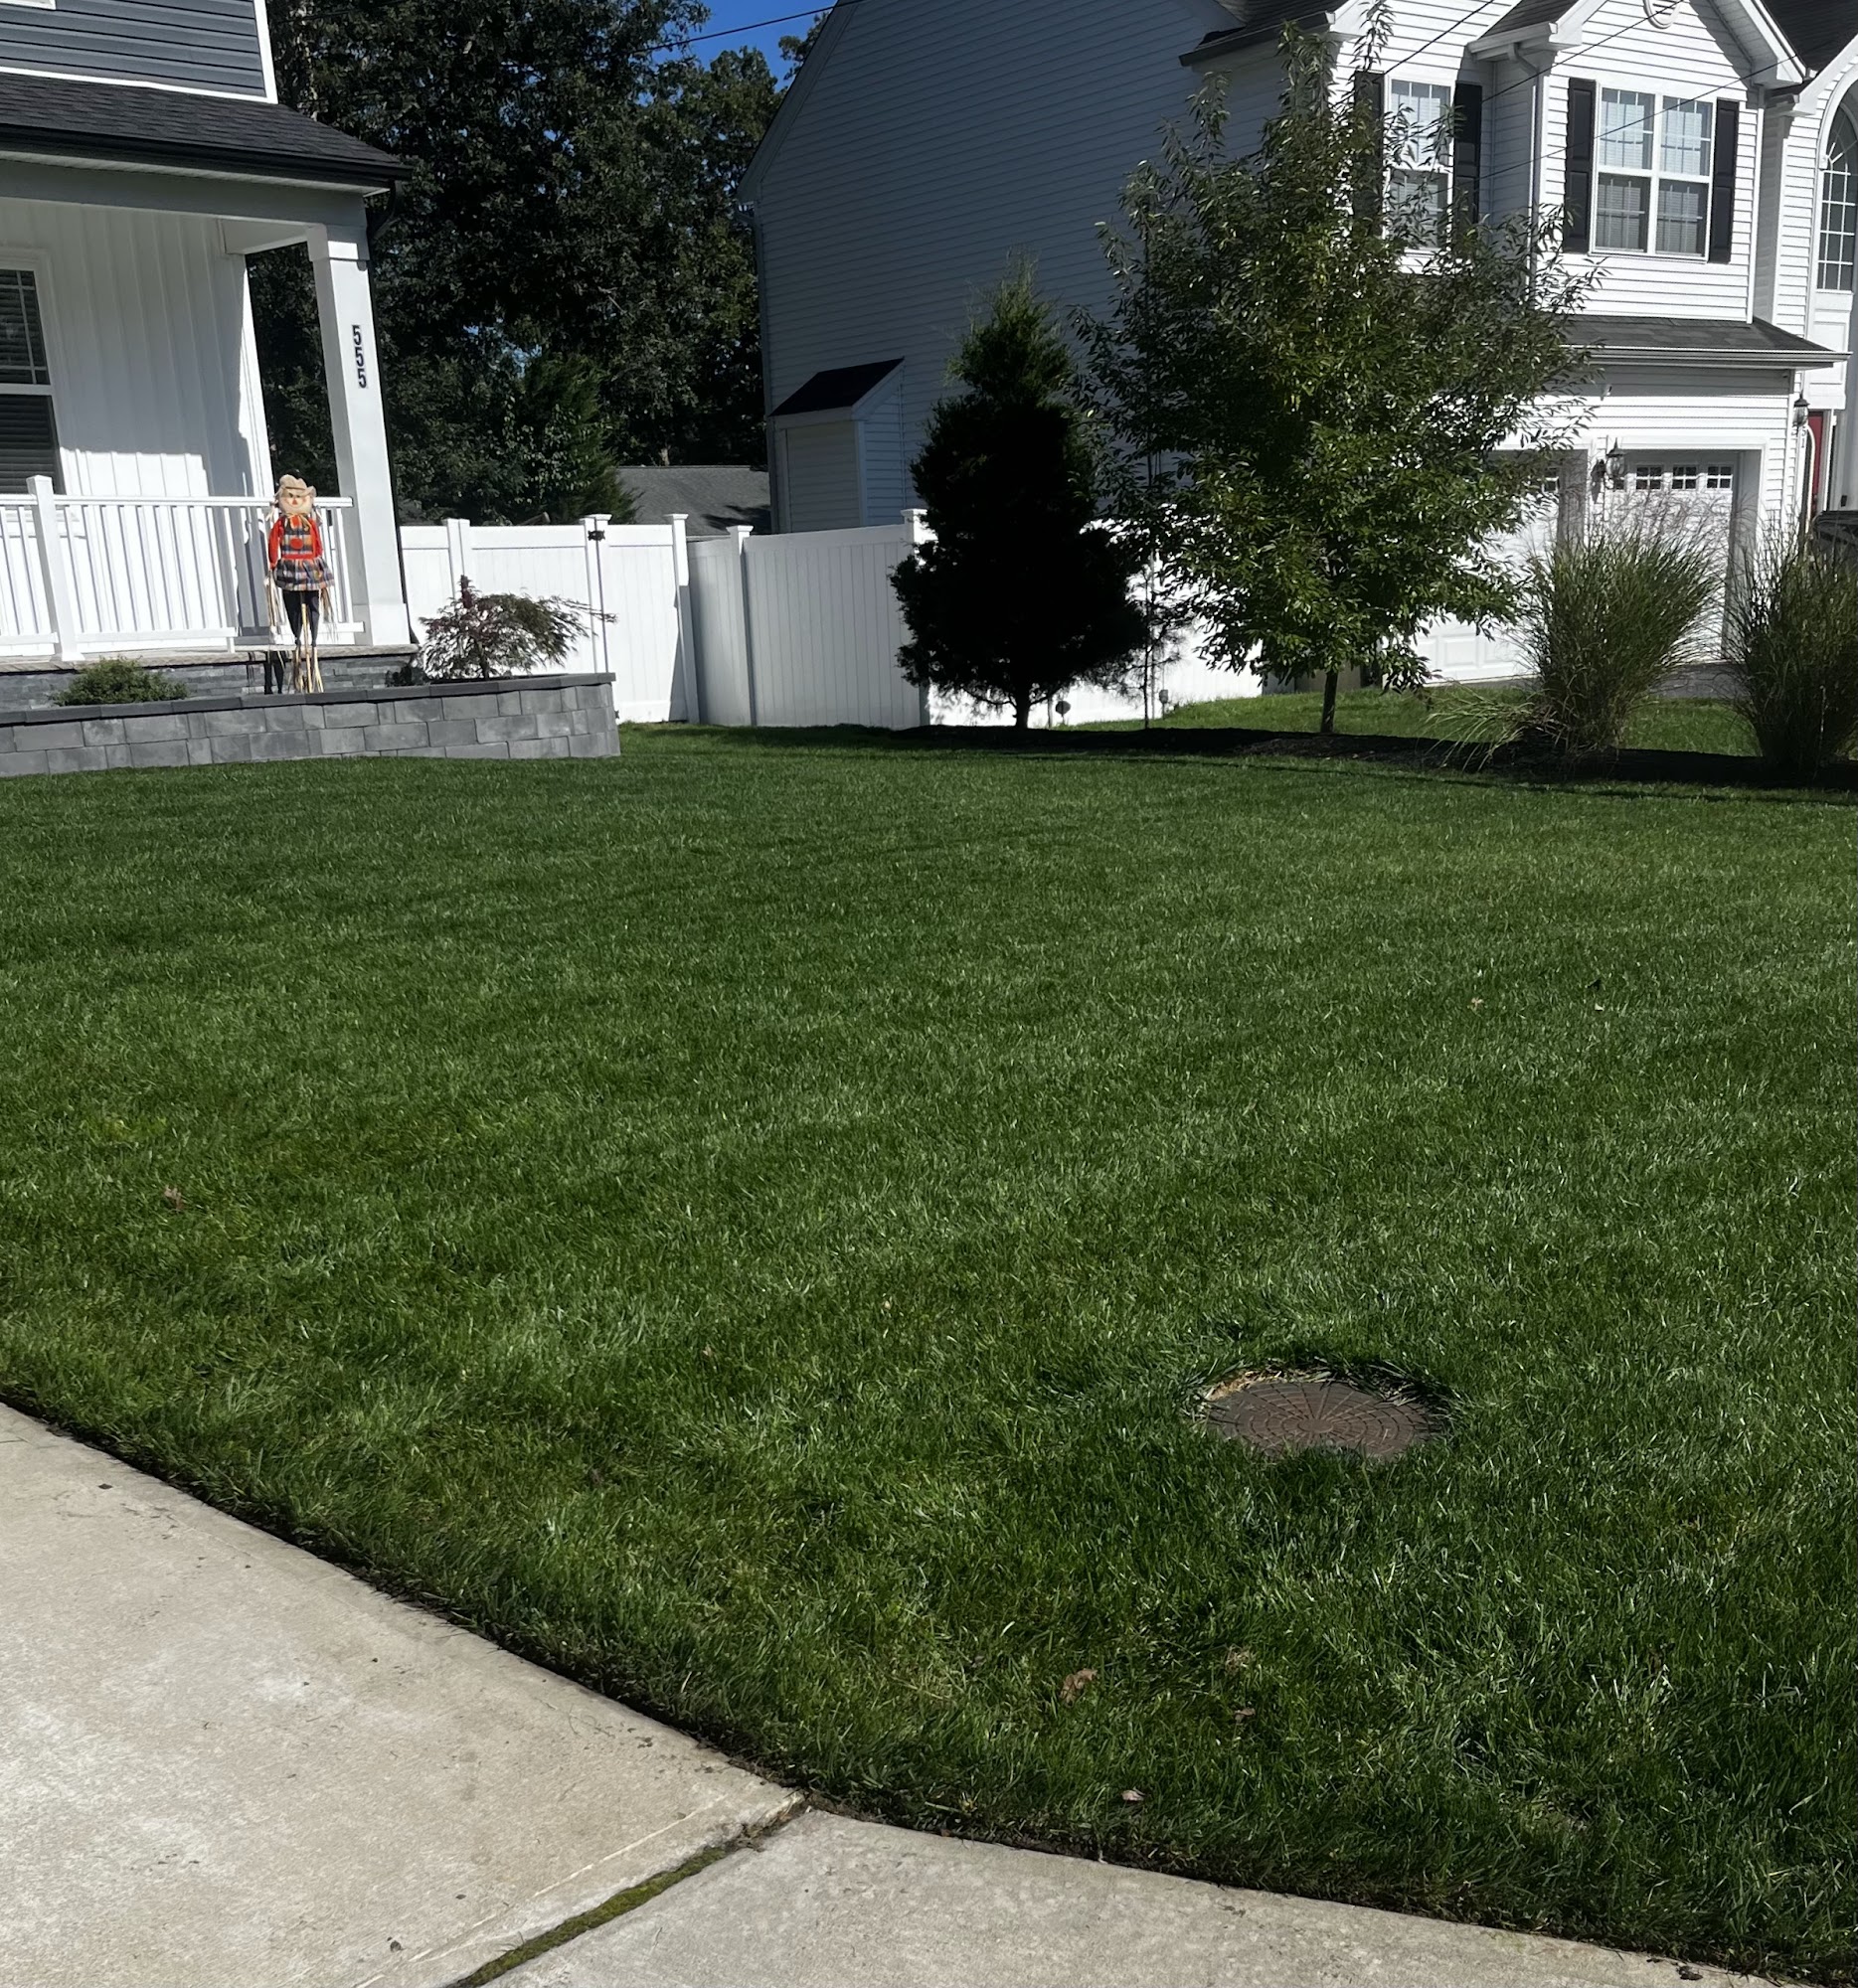 Ace of Spades Lawn and Property Services 6 Ridge Rd, Barnegat New Jersey 08005